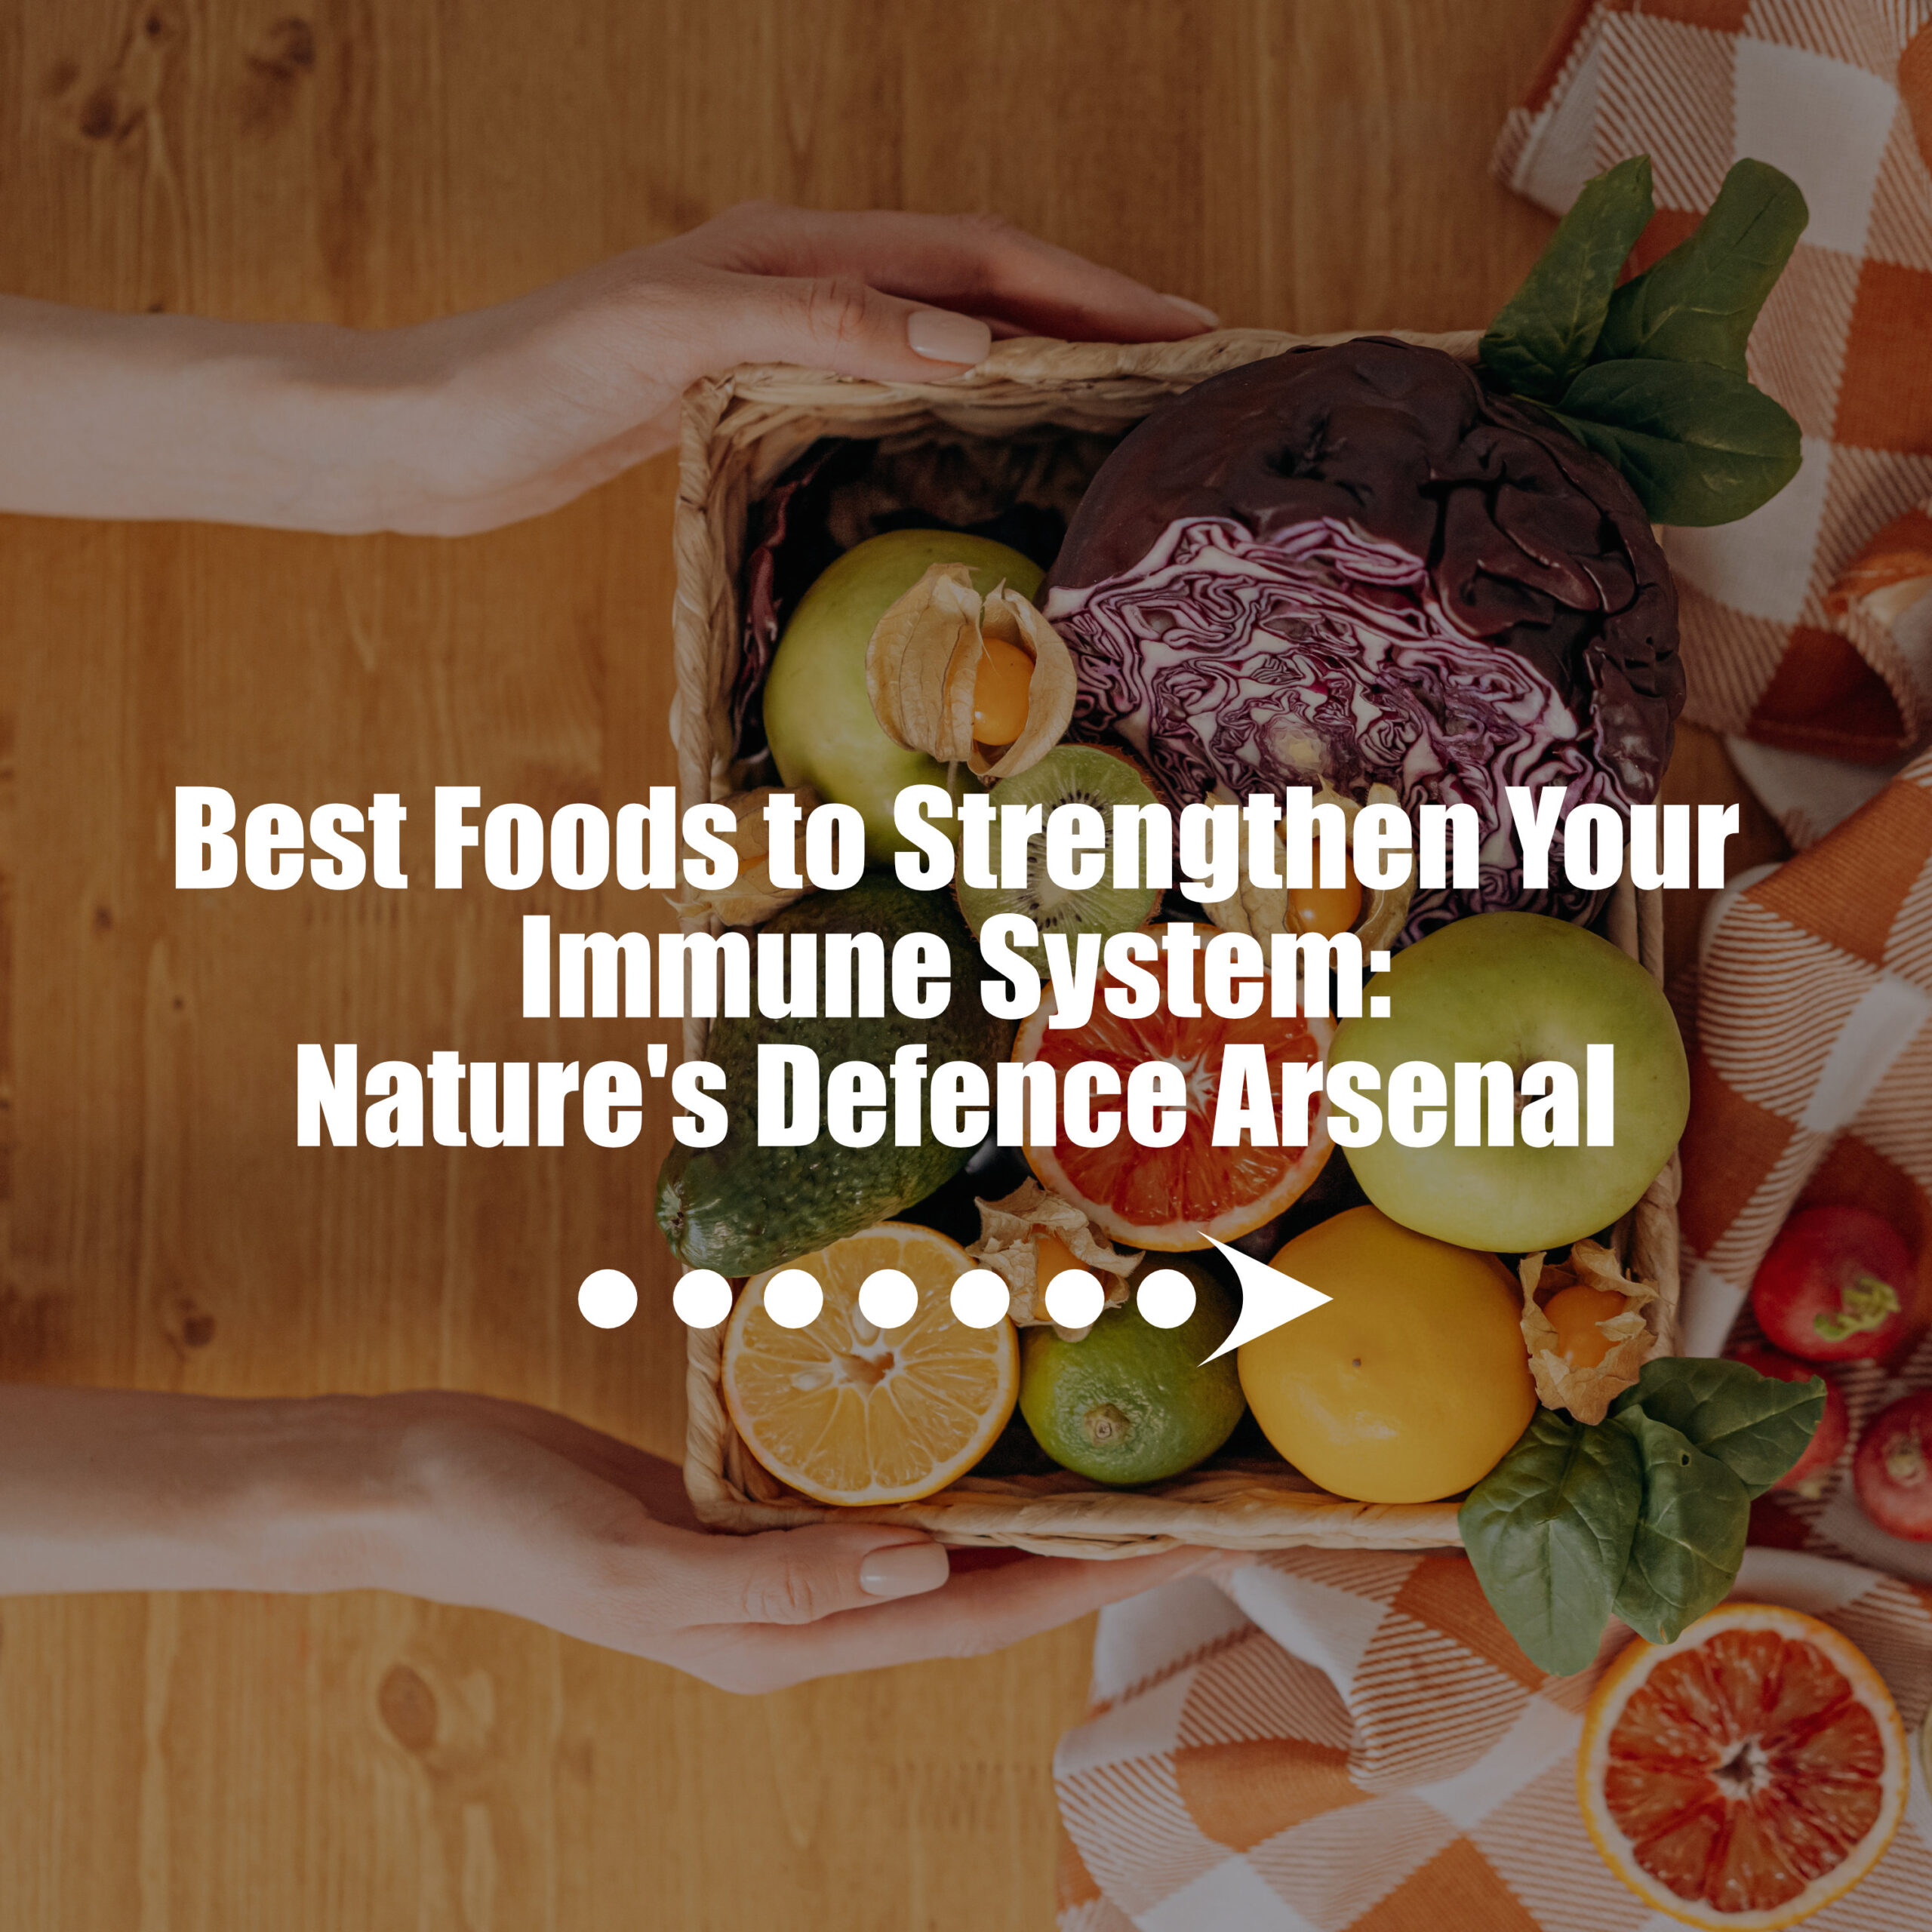 Best Foods to Strengthen Your Immune System: Nature’s Defense Arsenal